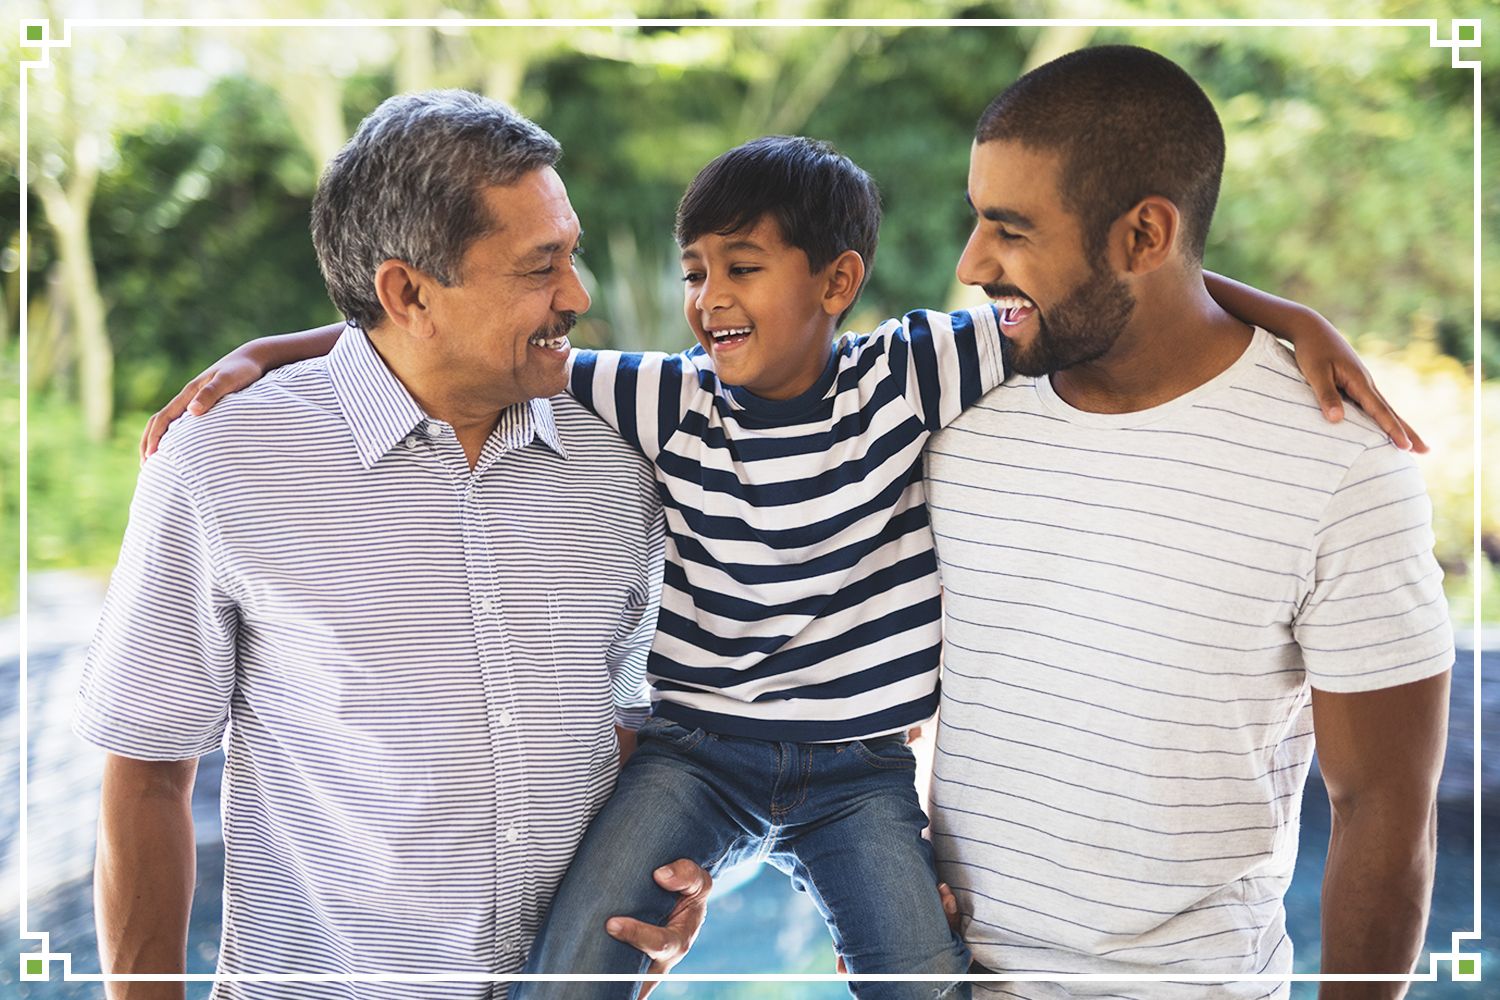 father and grandfather holding young boy, laughing